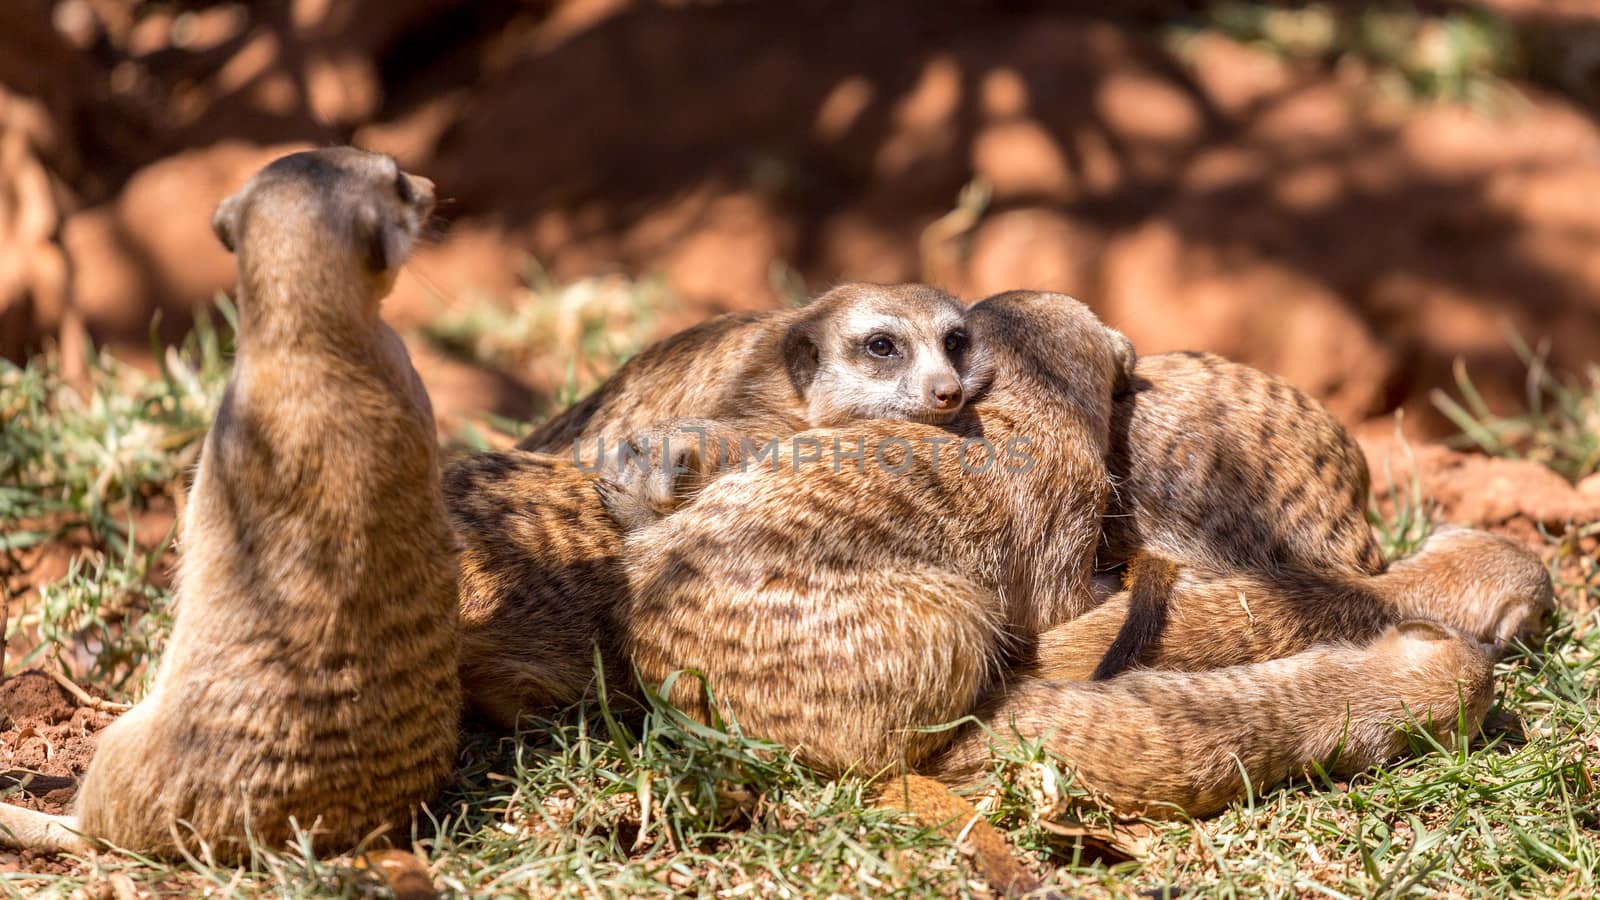 Meerkats huddled together with one on guard, and another alert and on the lookout